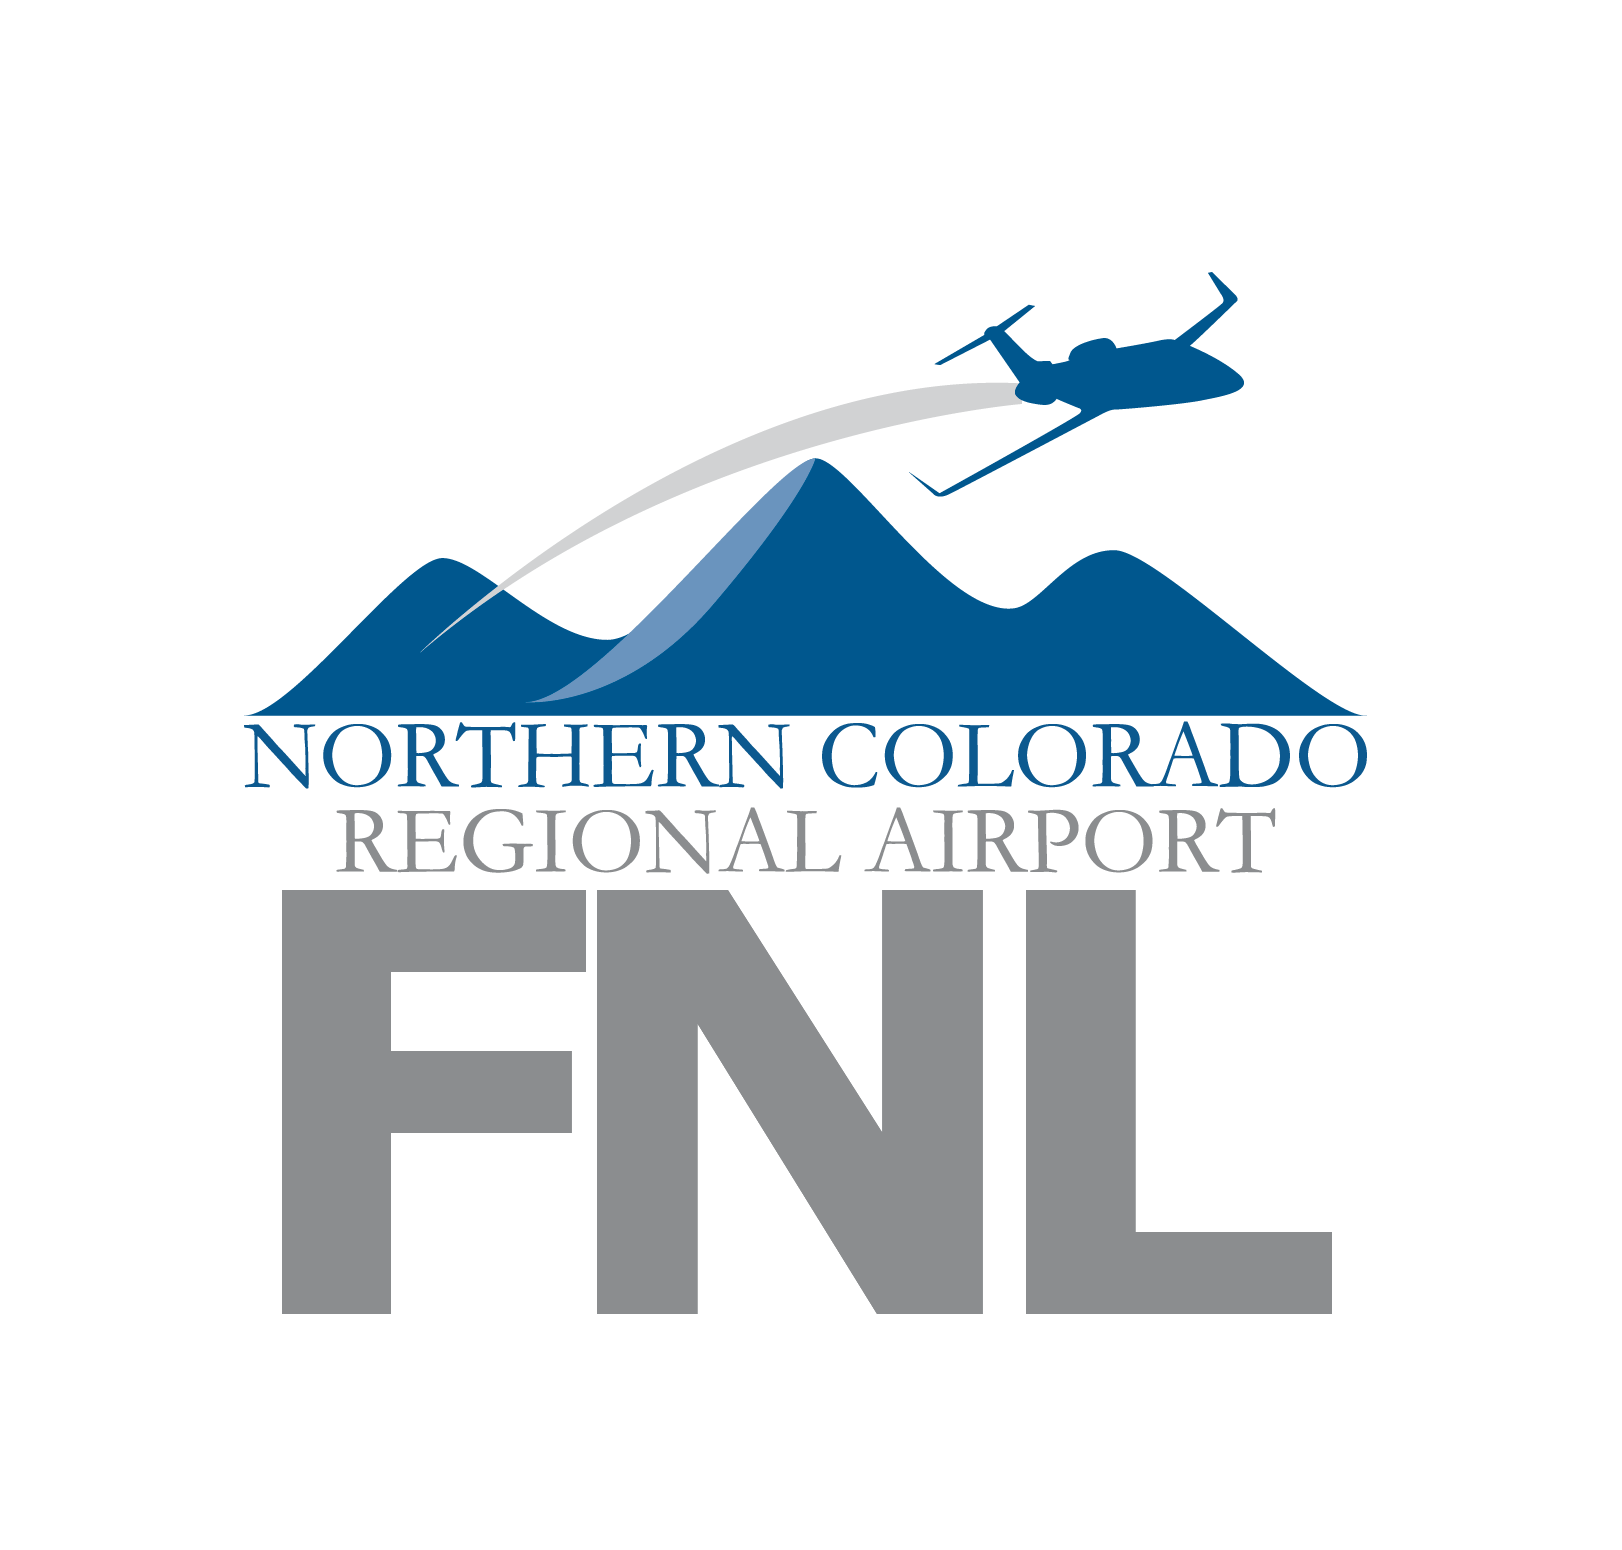 Fly from Northern Colorado Regional Airport - FNL